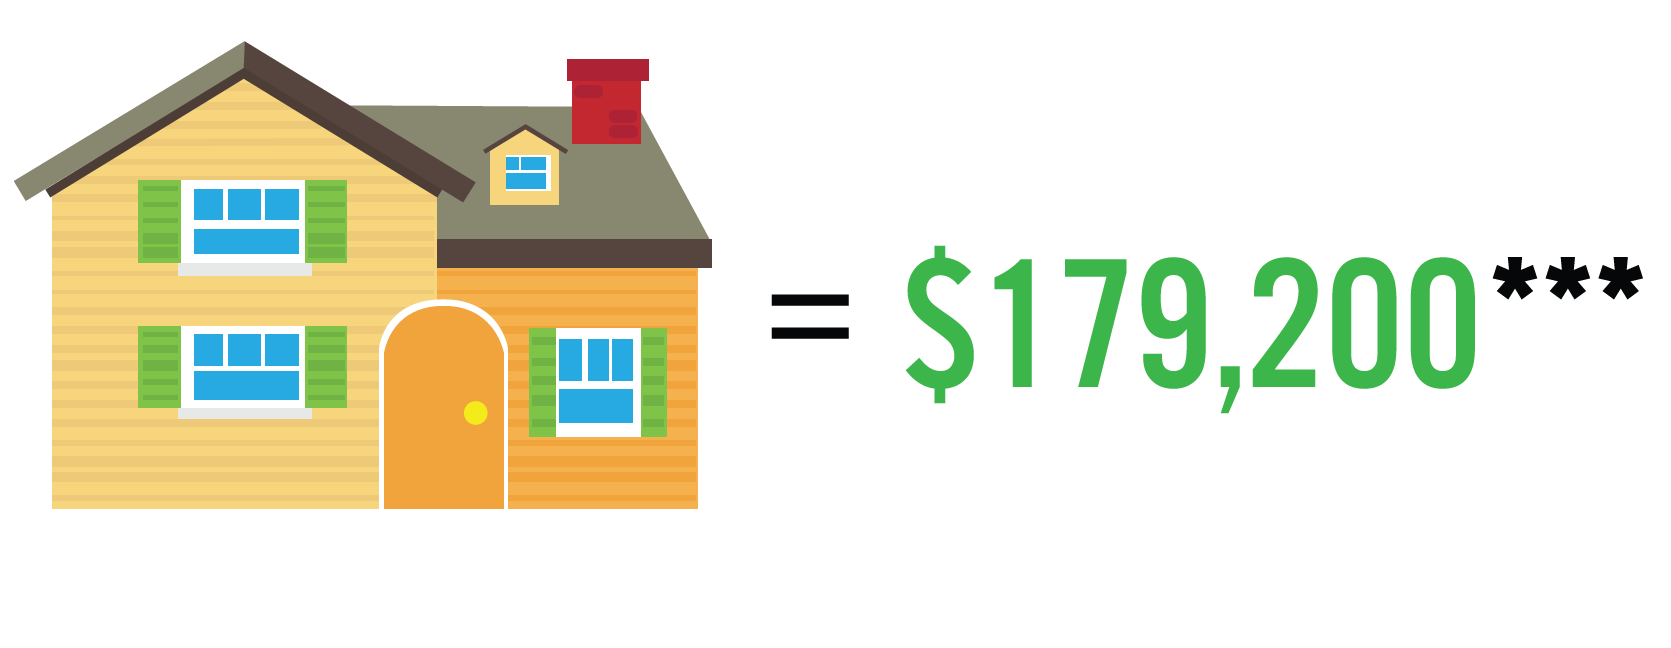 average price of a house